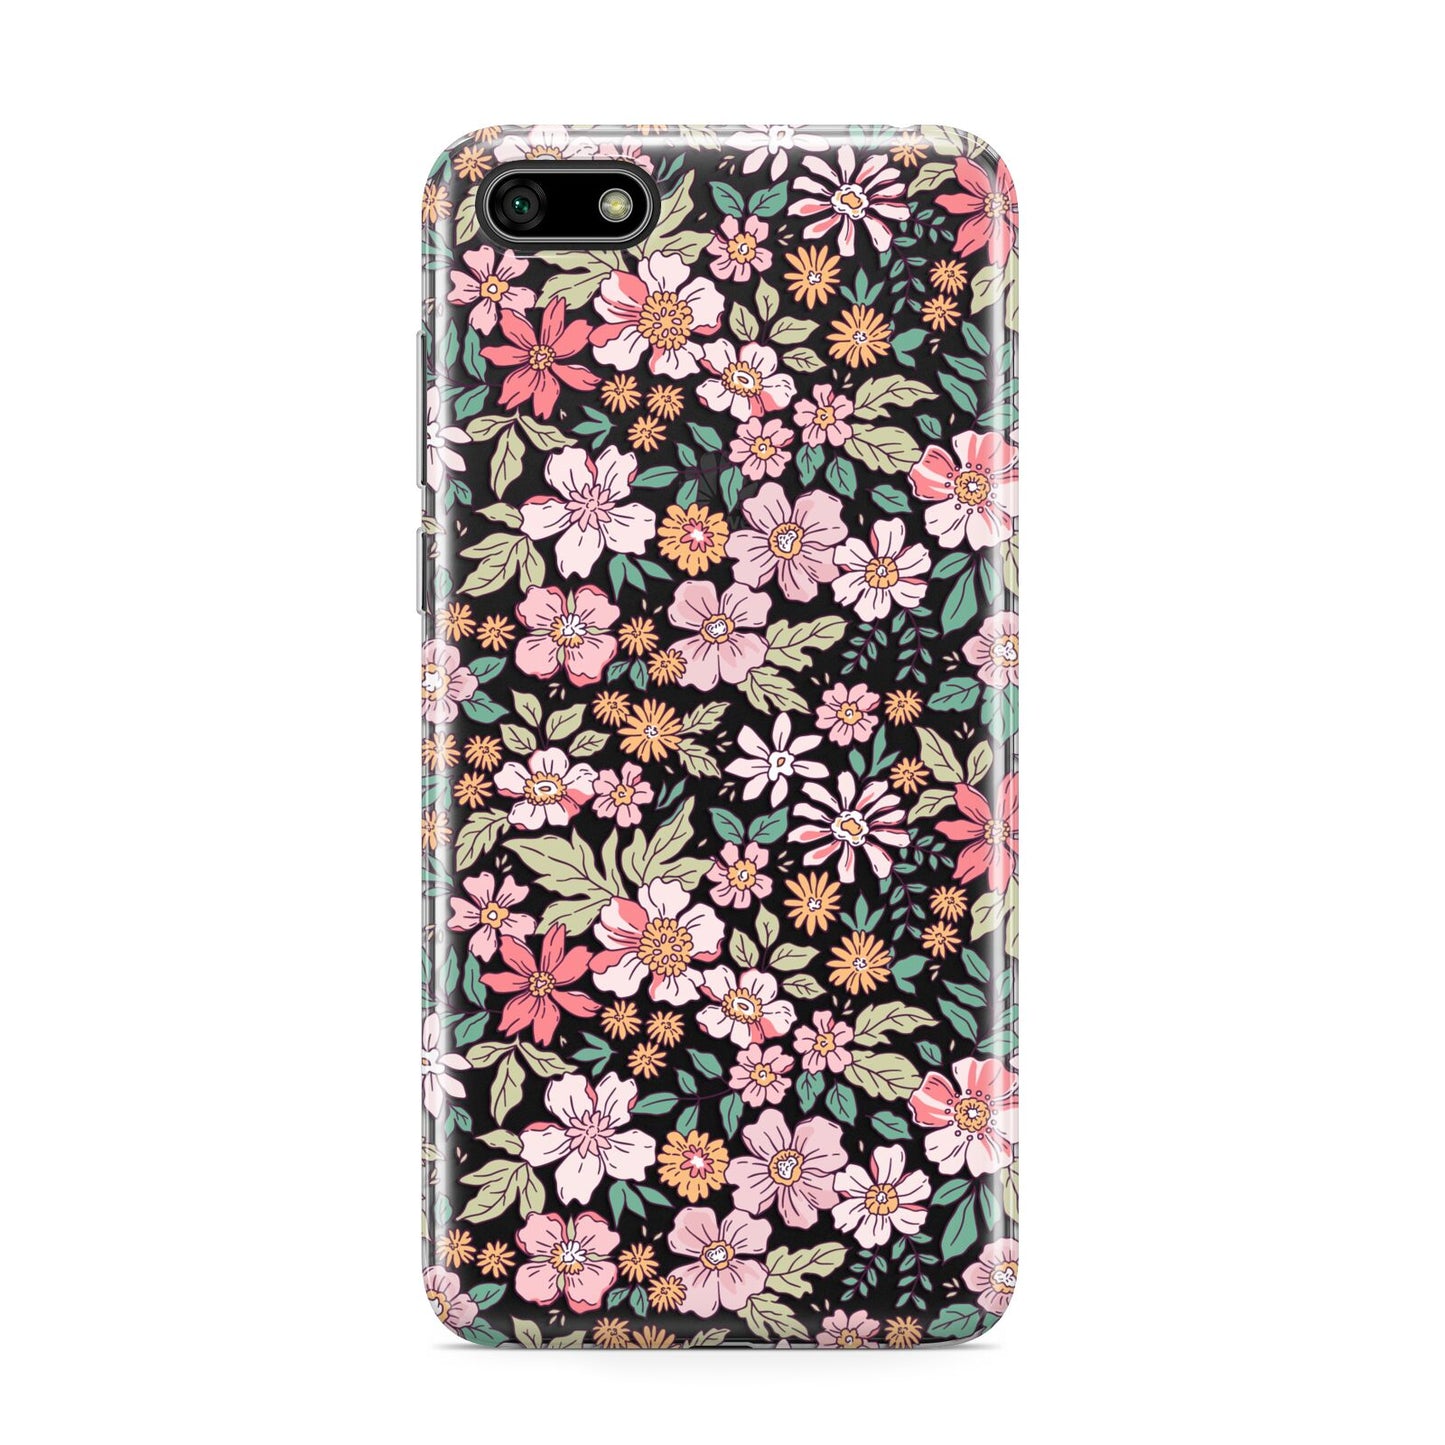 Small Floral Pattern Huawei Y5 Prime 2018 Phone Case